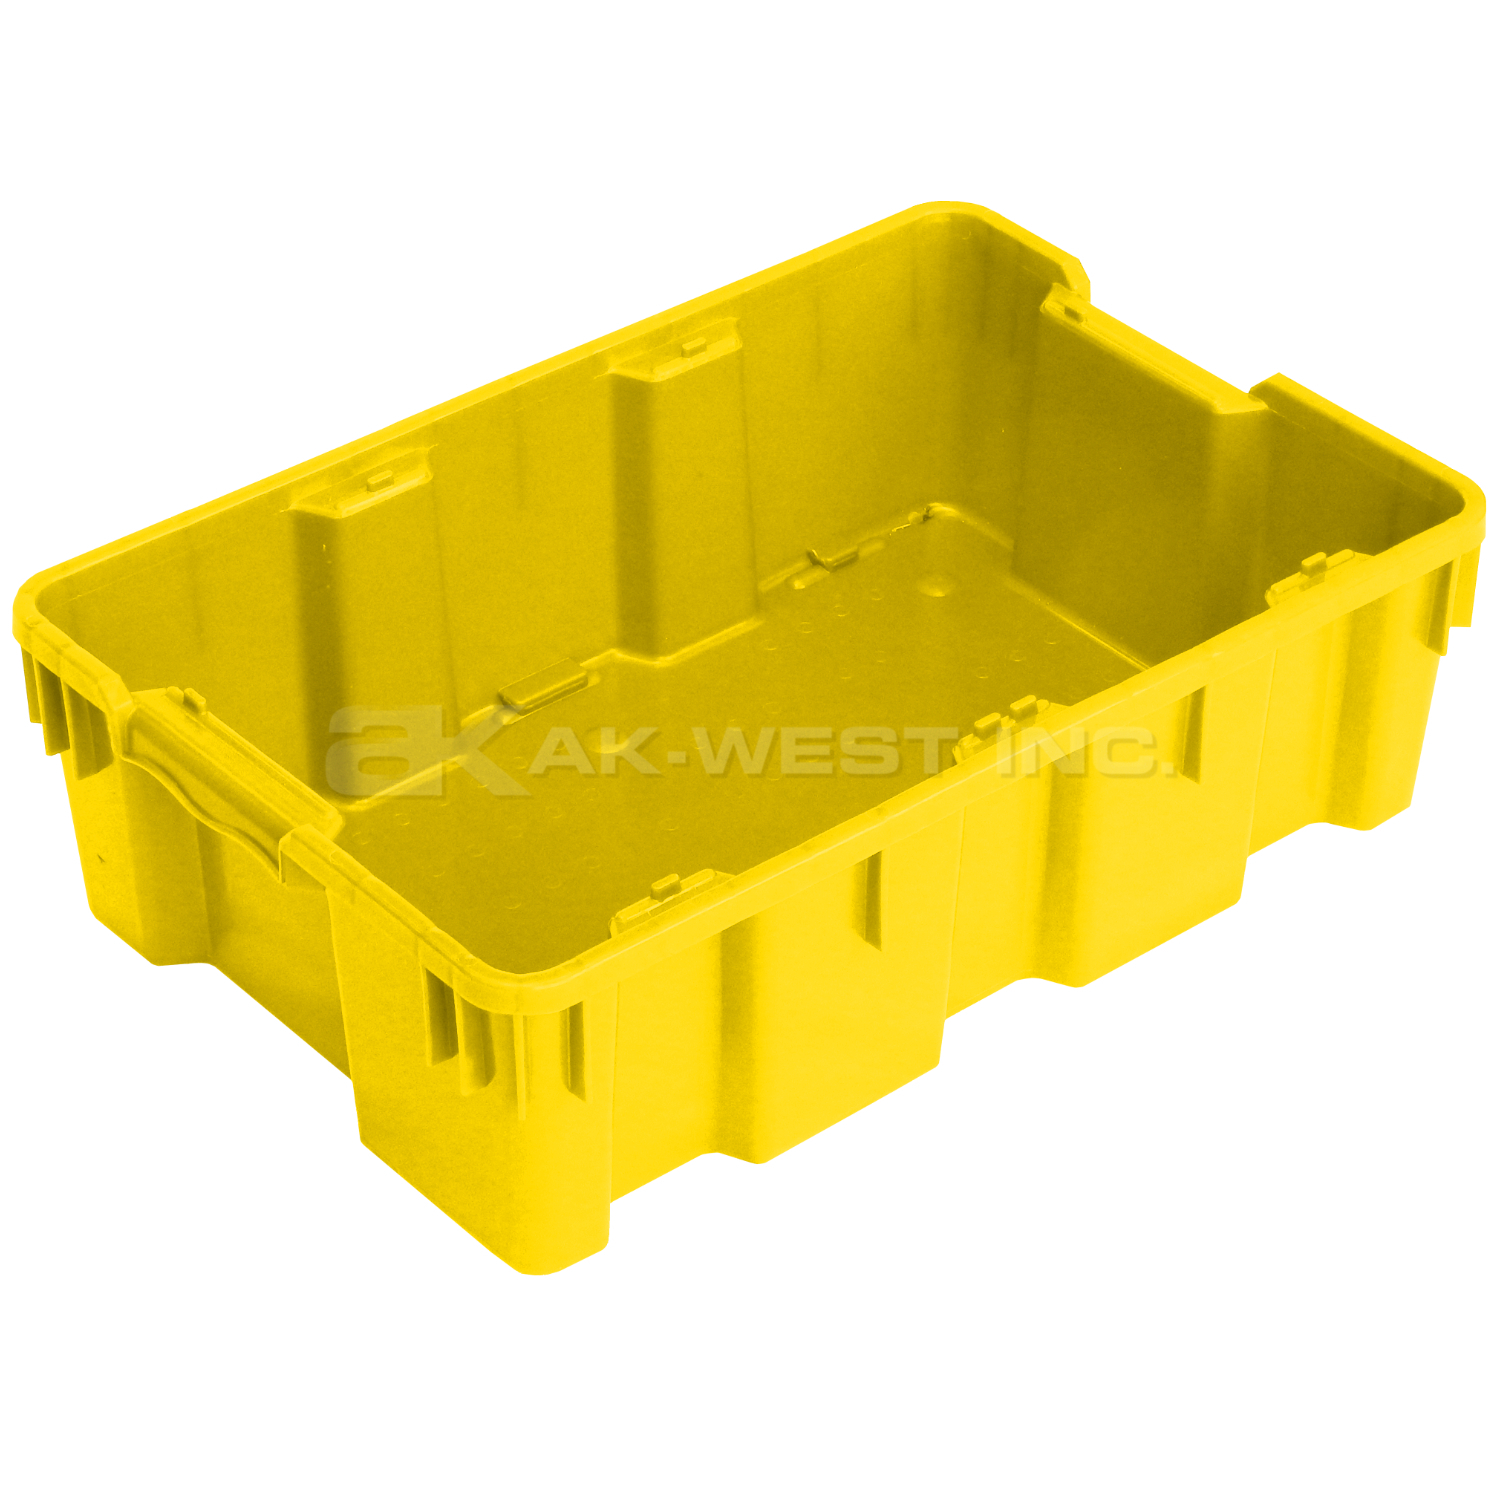 Yellow, 24"L x 16"W x 7"H Stack and Nest Container w/ Solid Sides and Base